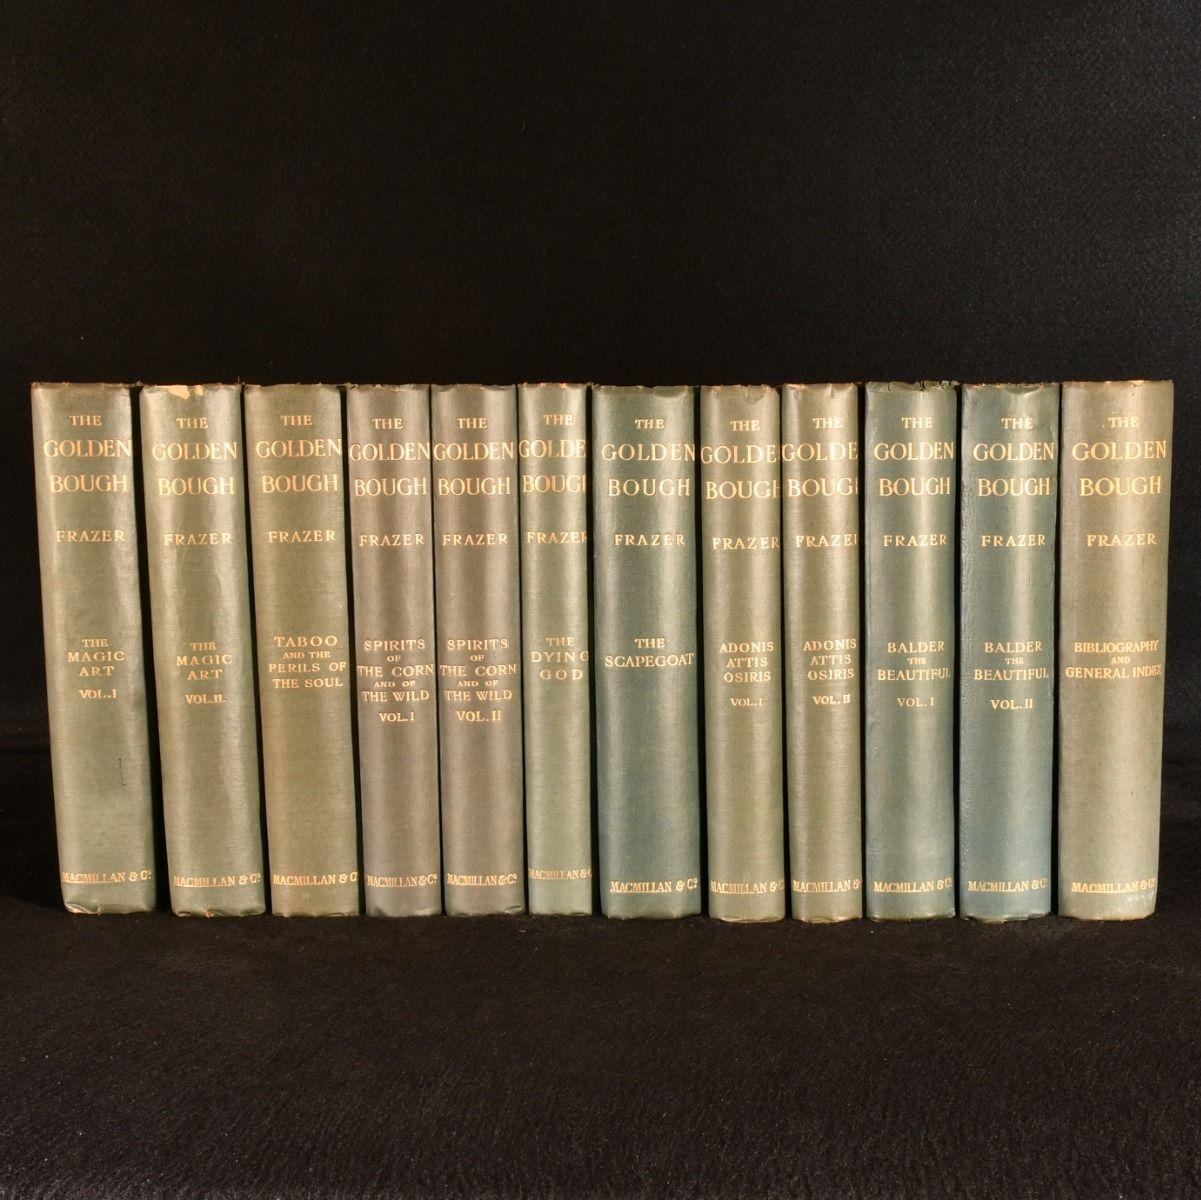 A complete set of the third and best edition of James George Frazer's famous study on religion, mythology and anthropology.

Mixed editions as is common with this work.

The third edition is considered to be the most important, as his work was